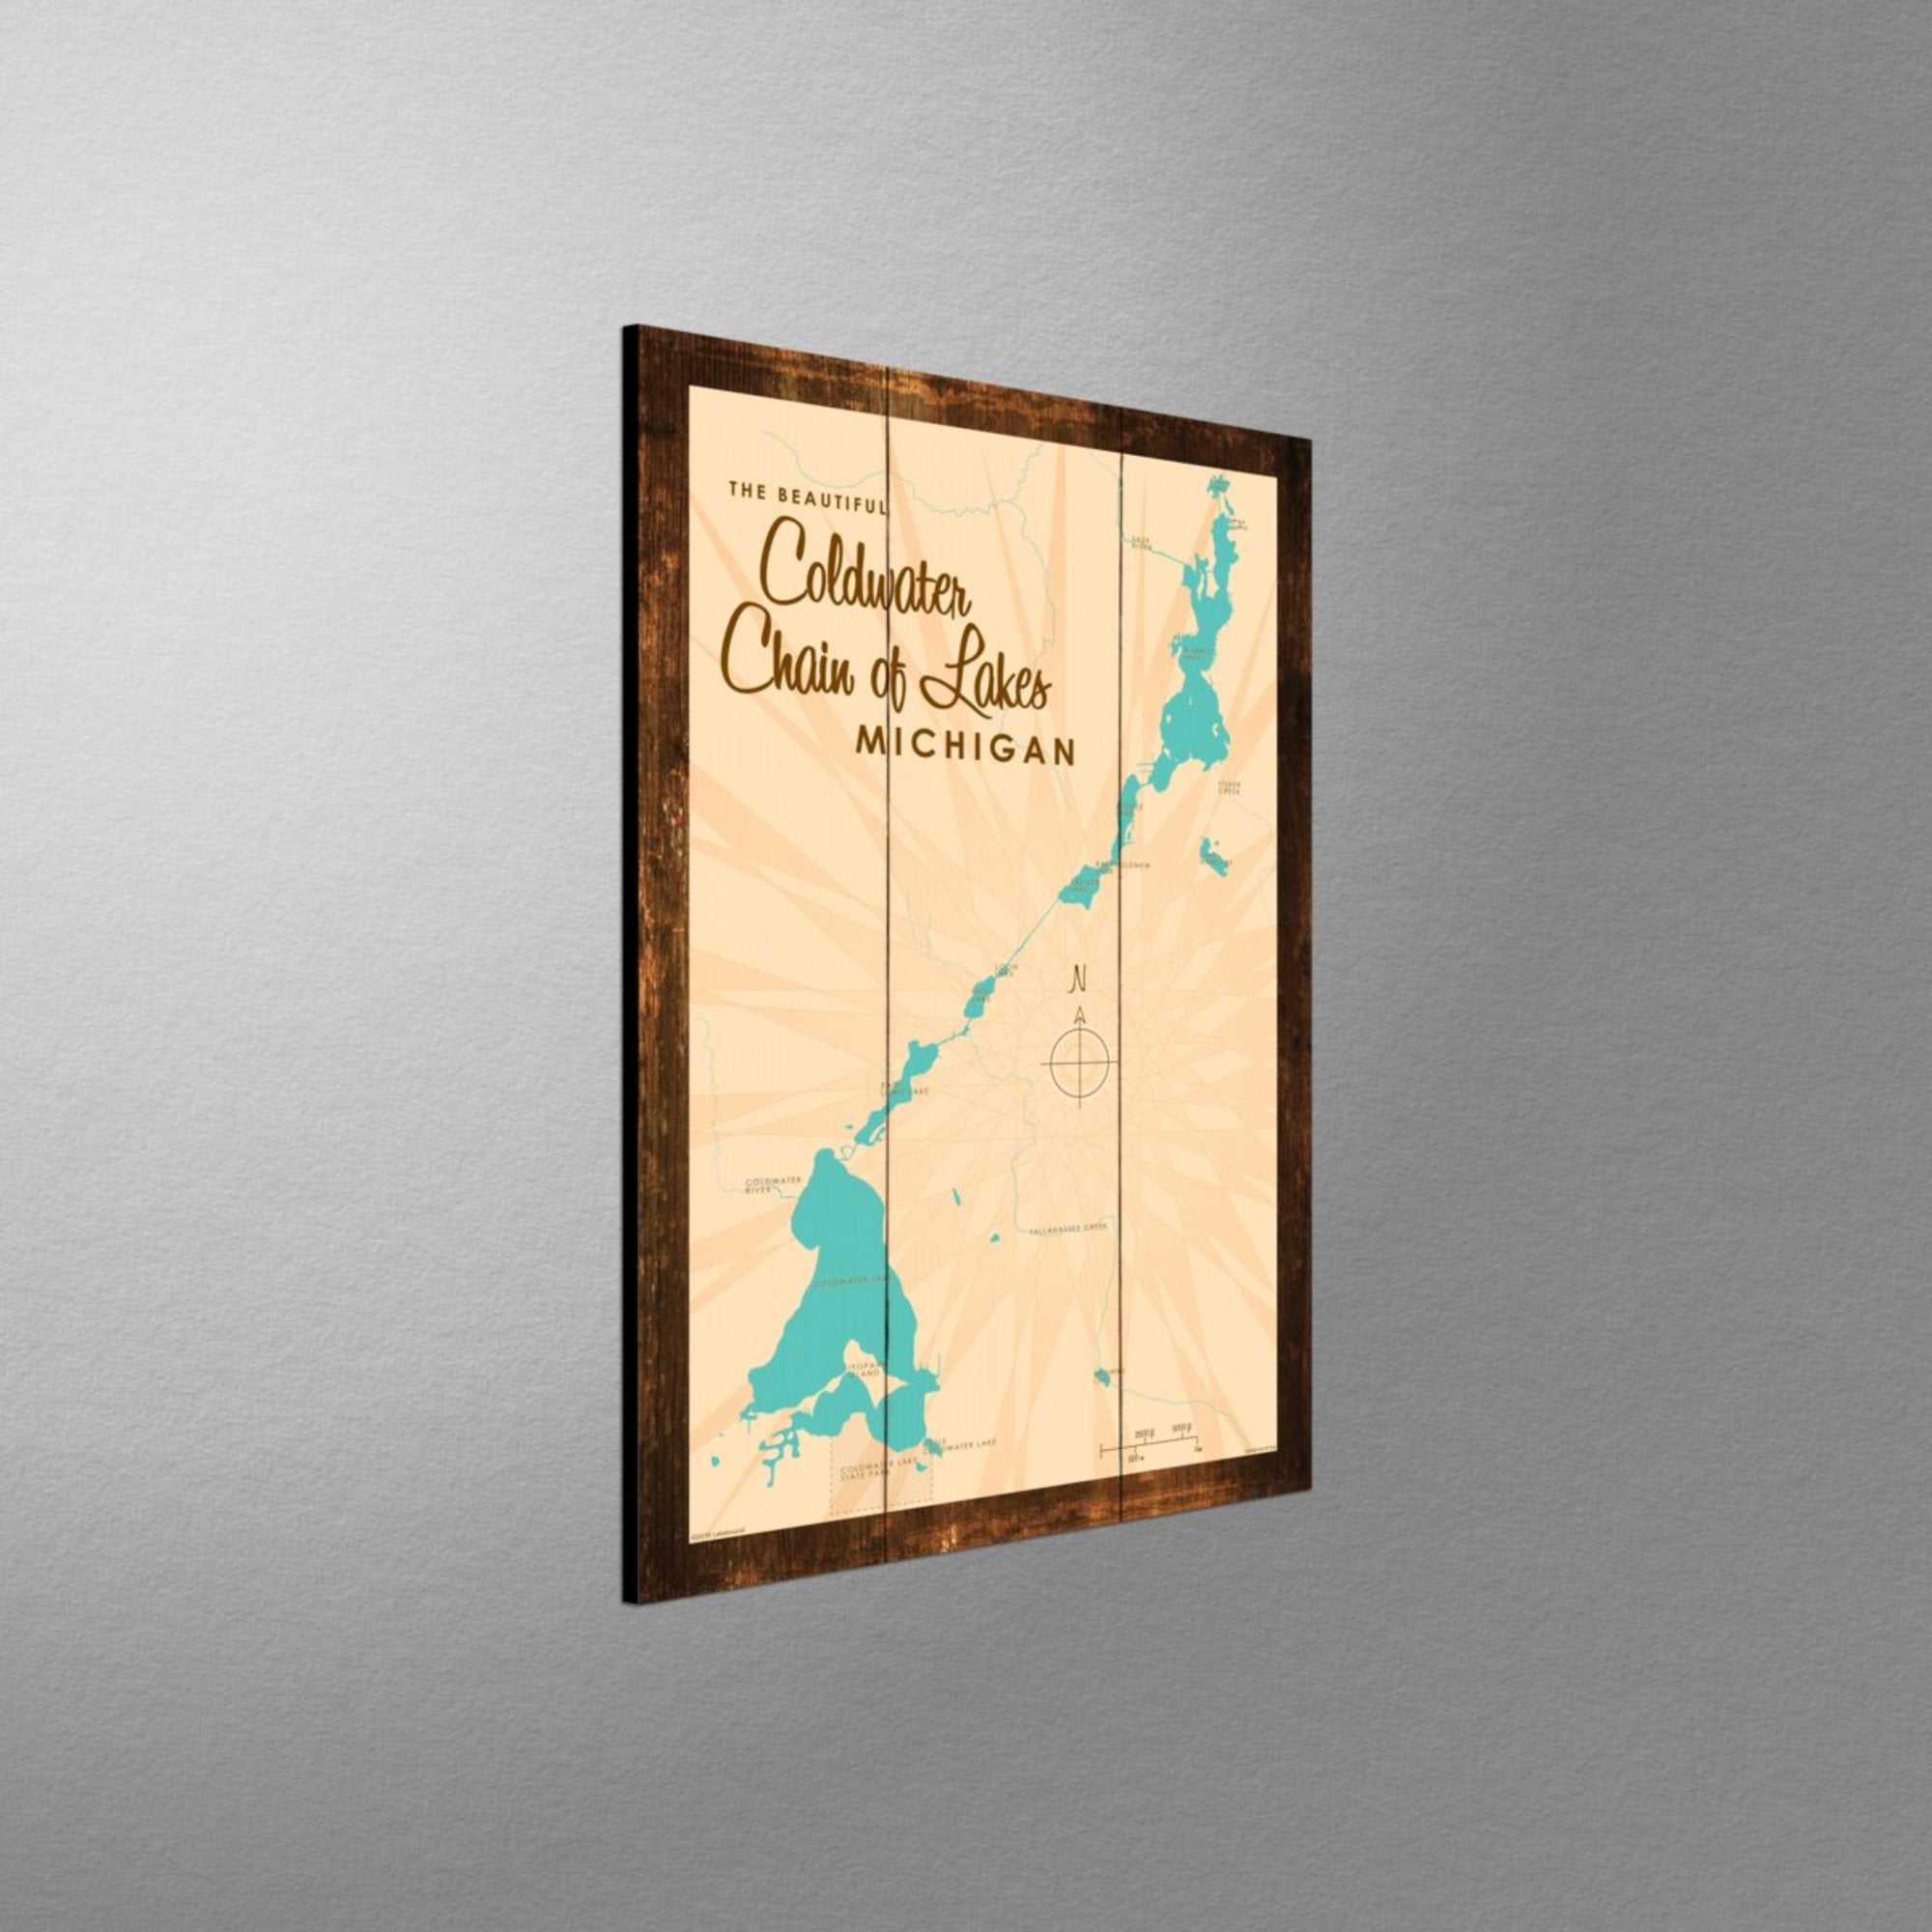 Coldwater Chain of Lakes Michigan, Rustic Wood Sign Map Art